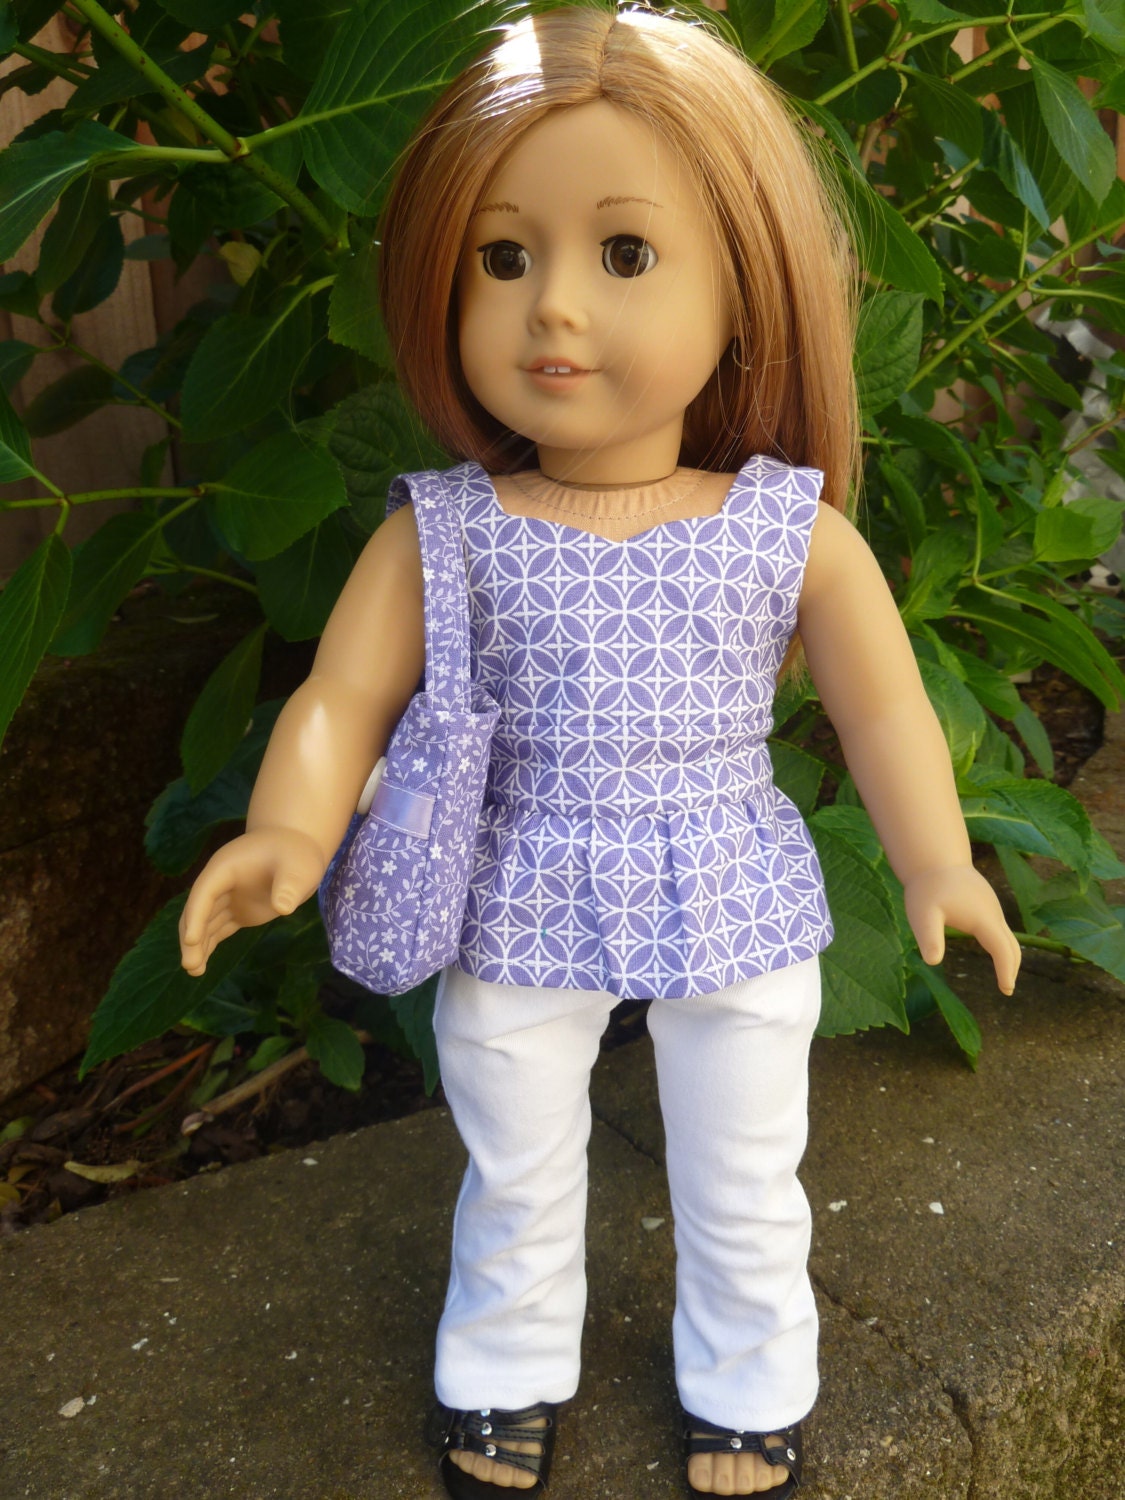 American Girl Doll Clothes - More Fun Around Town 3 piece outfit includes jeans, peplum top and purse